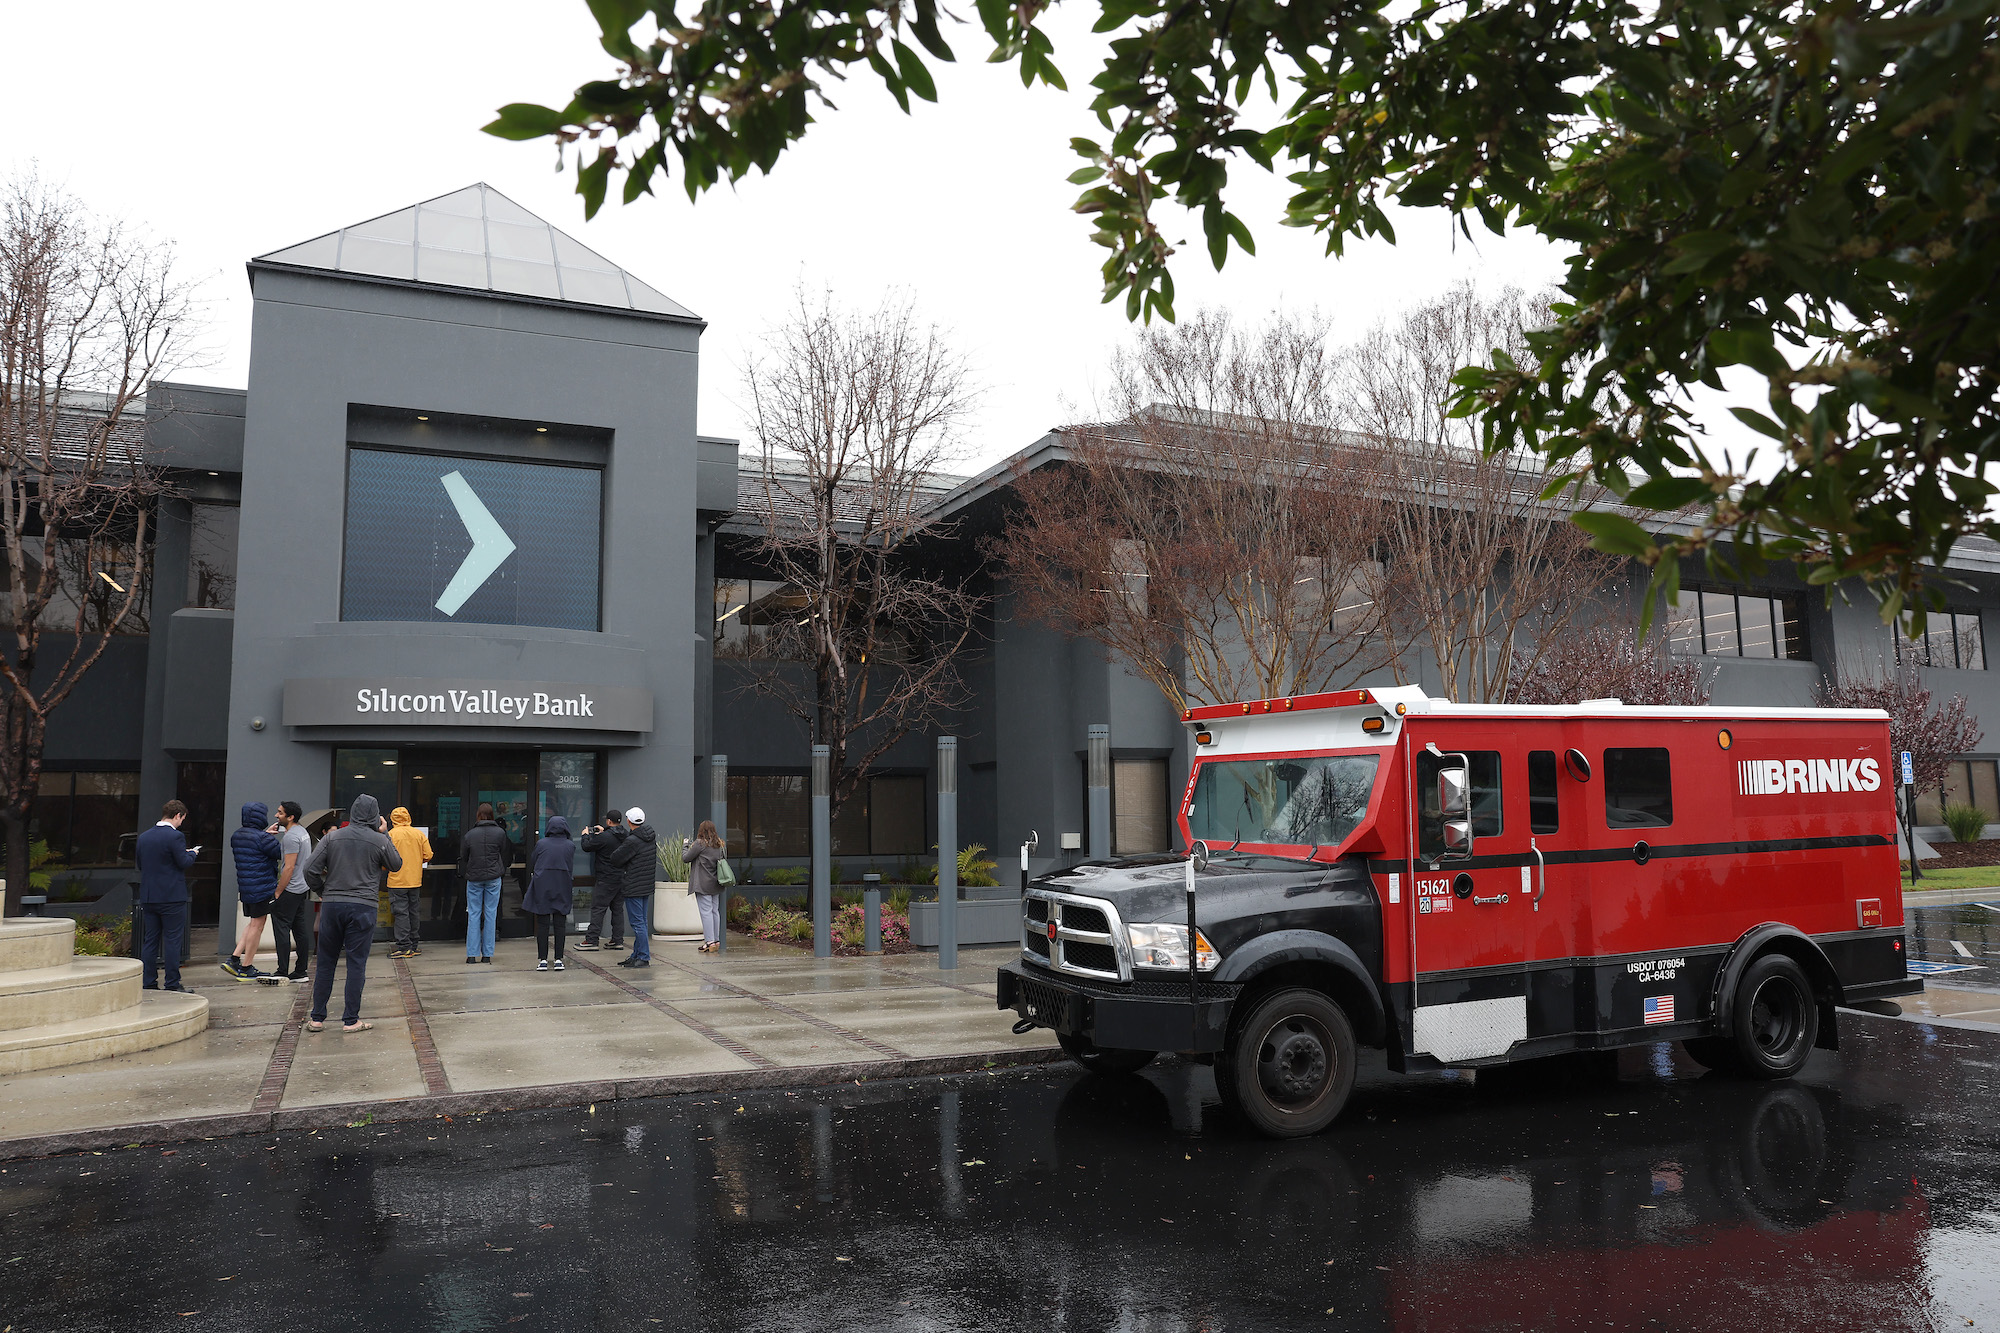 An armored truck sits parked in front of the shuttered Silicon Valley Bank headquarters in Santa Clara, California, on March 10.